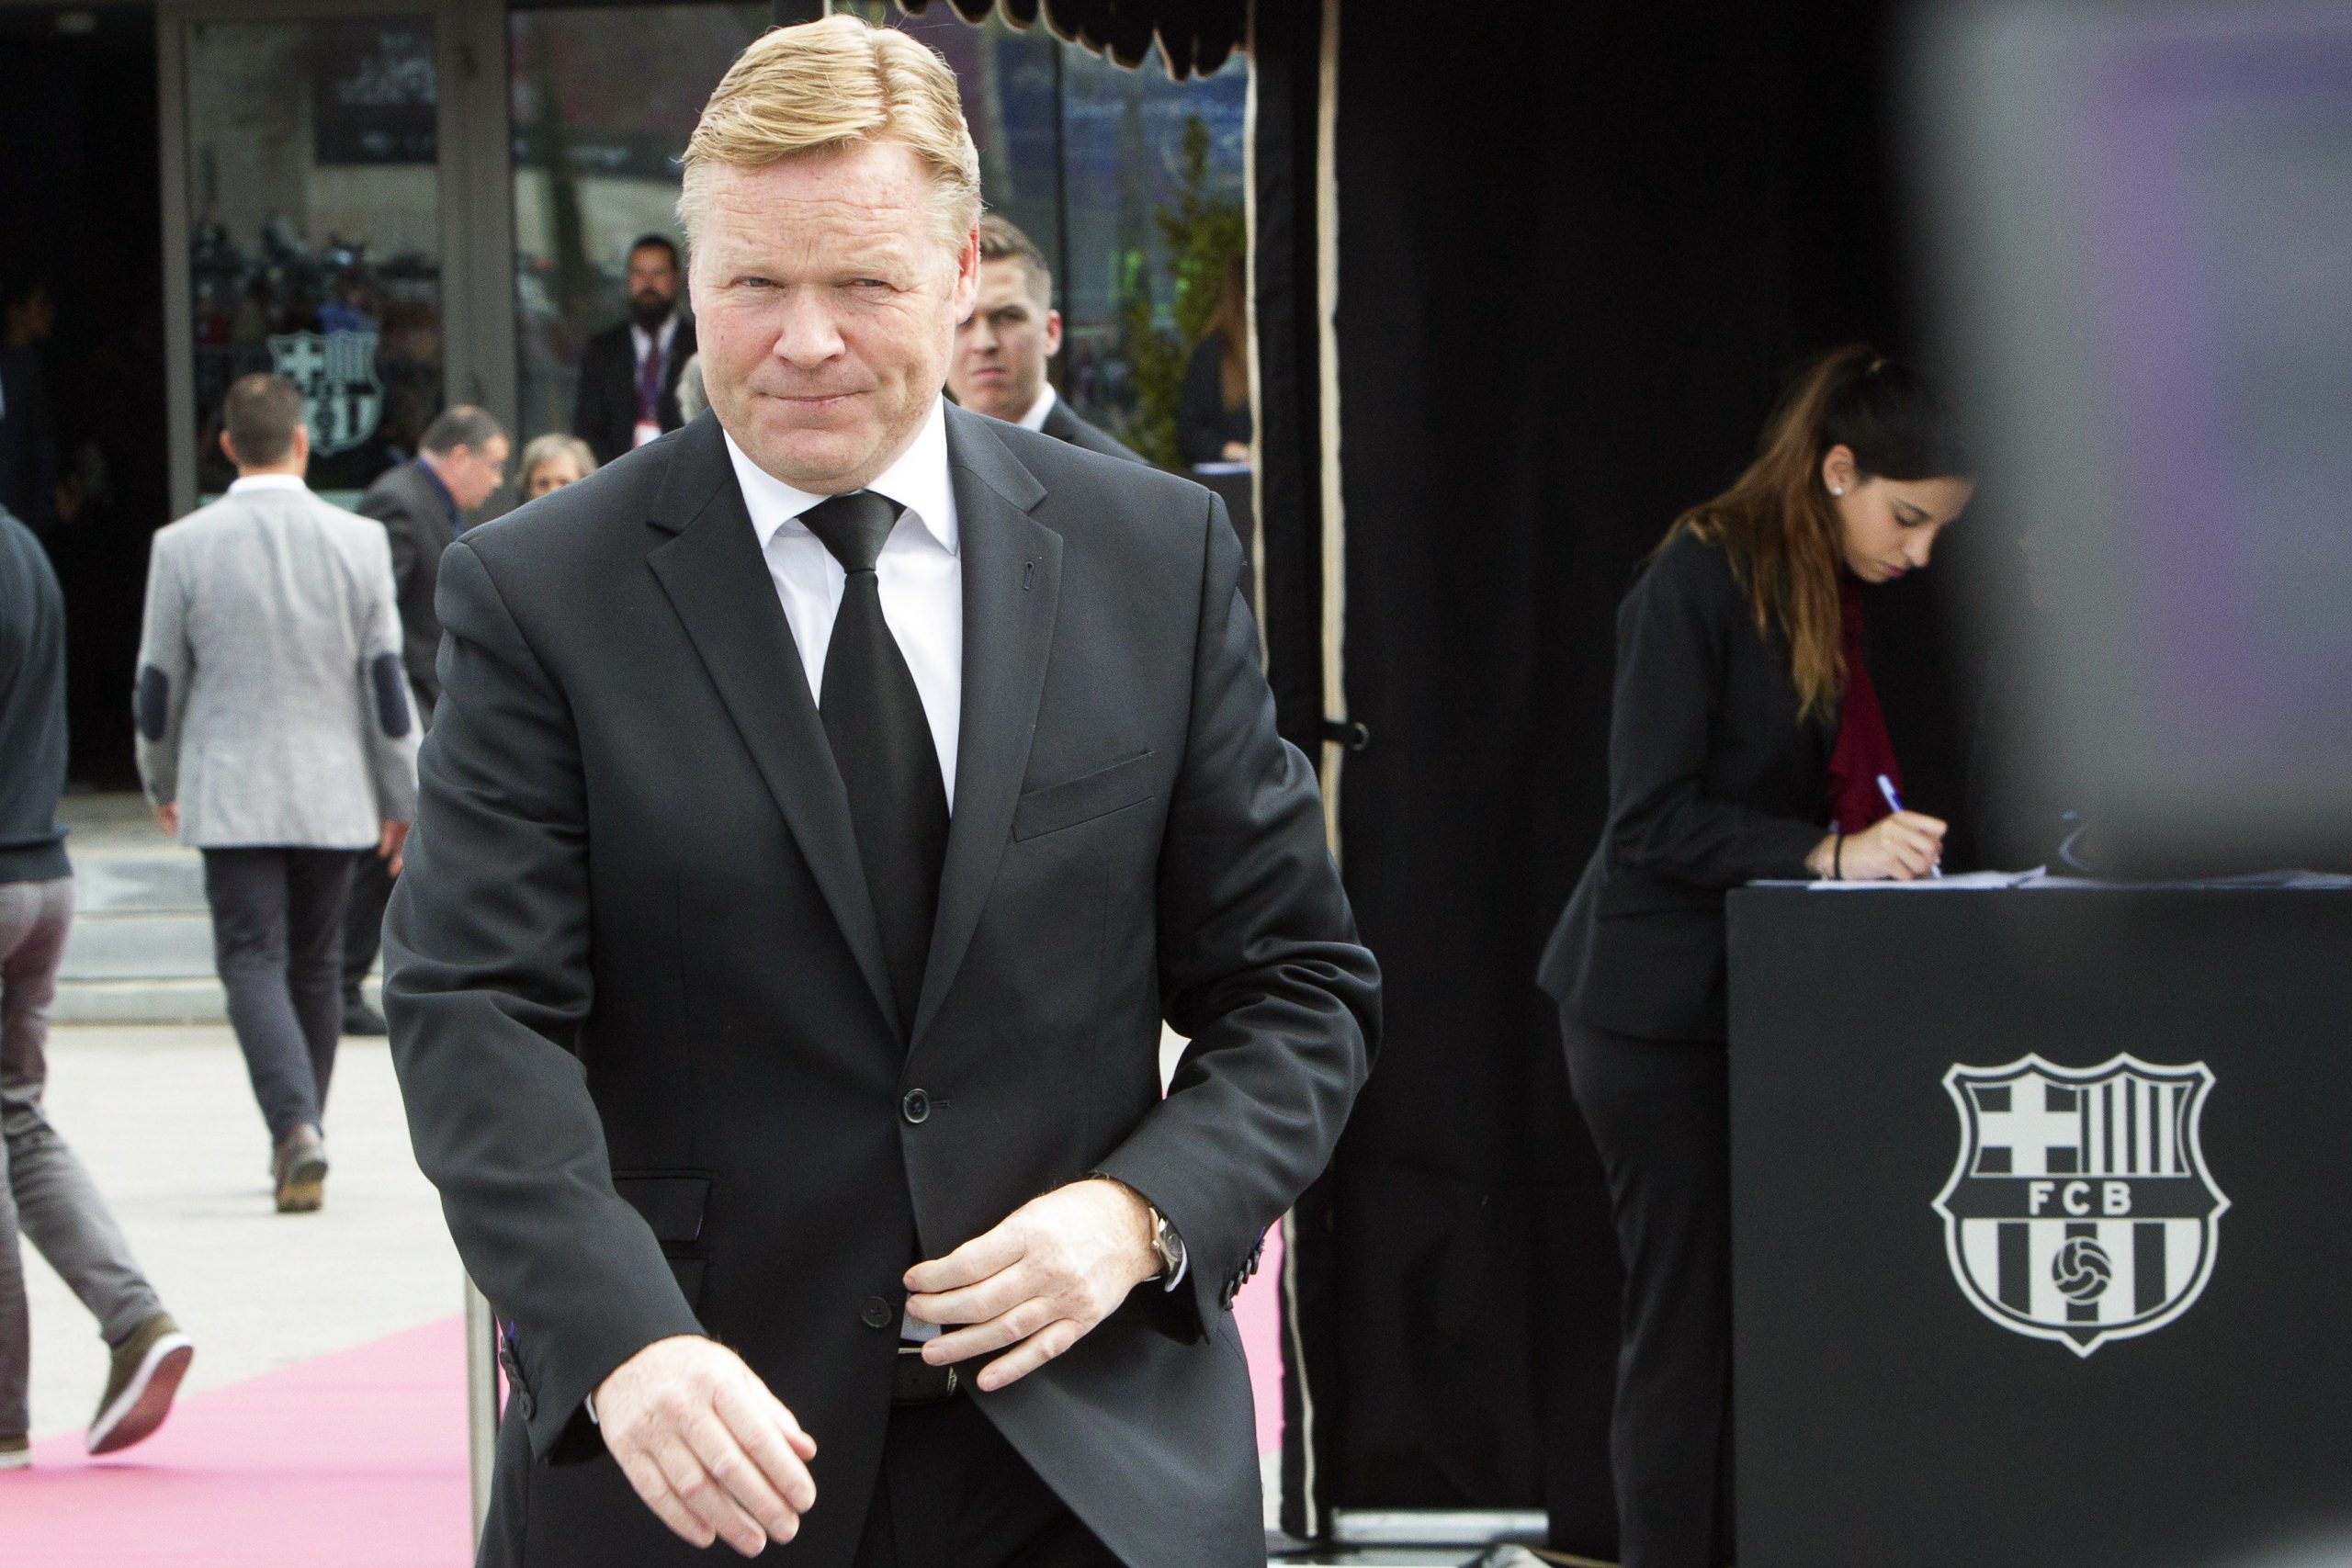 epa08609095 (FILE) - Former FC Barcelona player and Southampton manager Ronald Koeman after paying tribute to late Dutch soccer legend Johan Cruyff at Auditori 1899 near the Camp Nou stadium in Barcelona, northeastern Spain, 29 March 2016 (re-issued on 17 August 2020). Former FC Barcelona player and assistant manager Ronald Koeman is set to take over Spanish La Liga side FC Barcelona to replace Quique Setien, media reports claimed on 17 August 2020.  EPA/QUIQUE GARCIA *** Local Caption *** 52672864